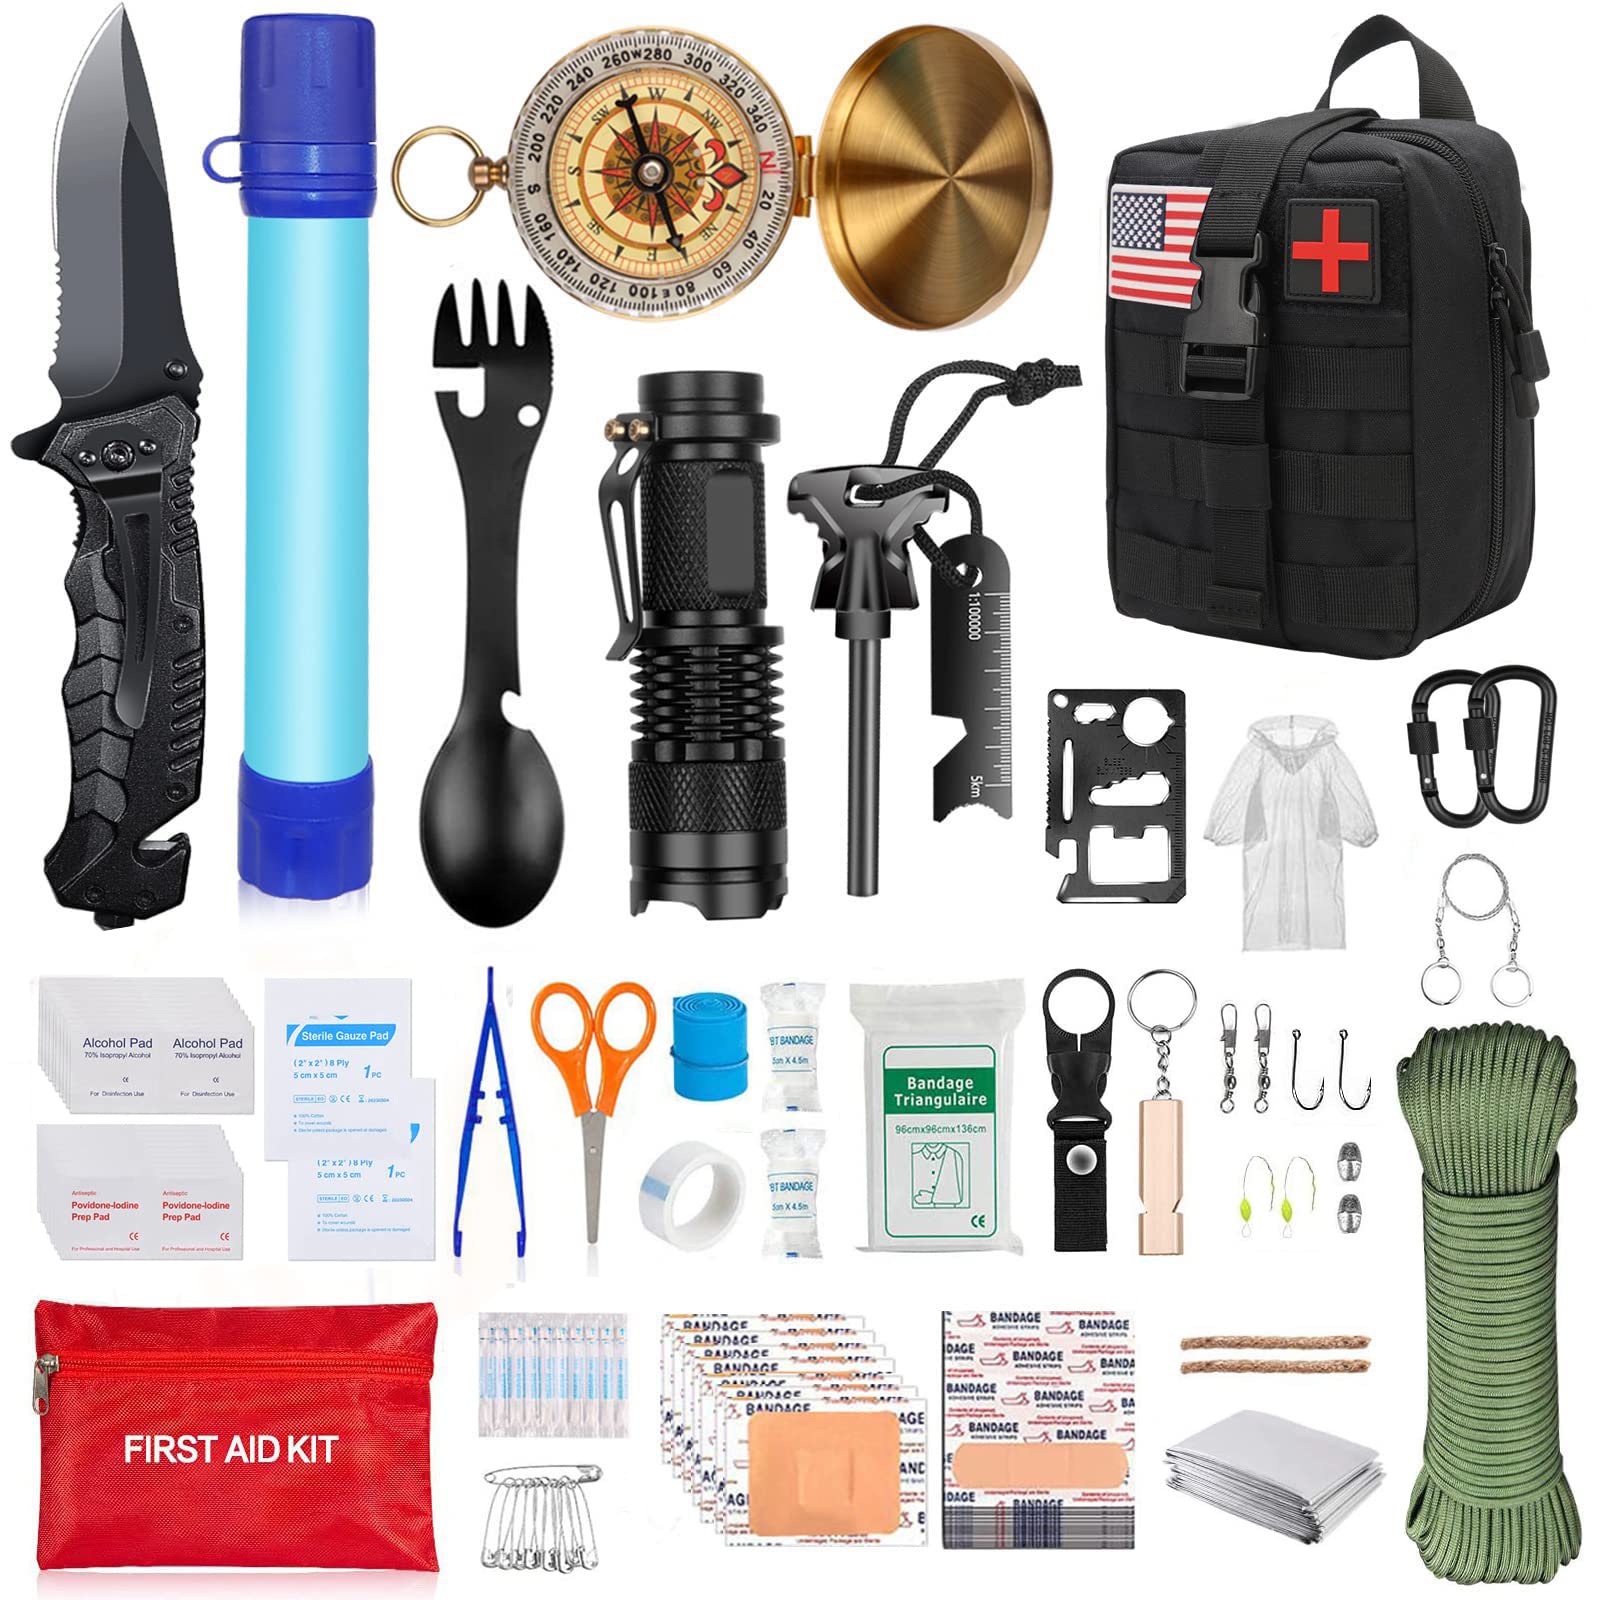 Survival Kits Survival Gear And Equipment Hunting Fishing Includes